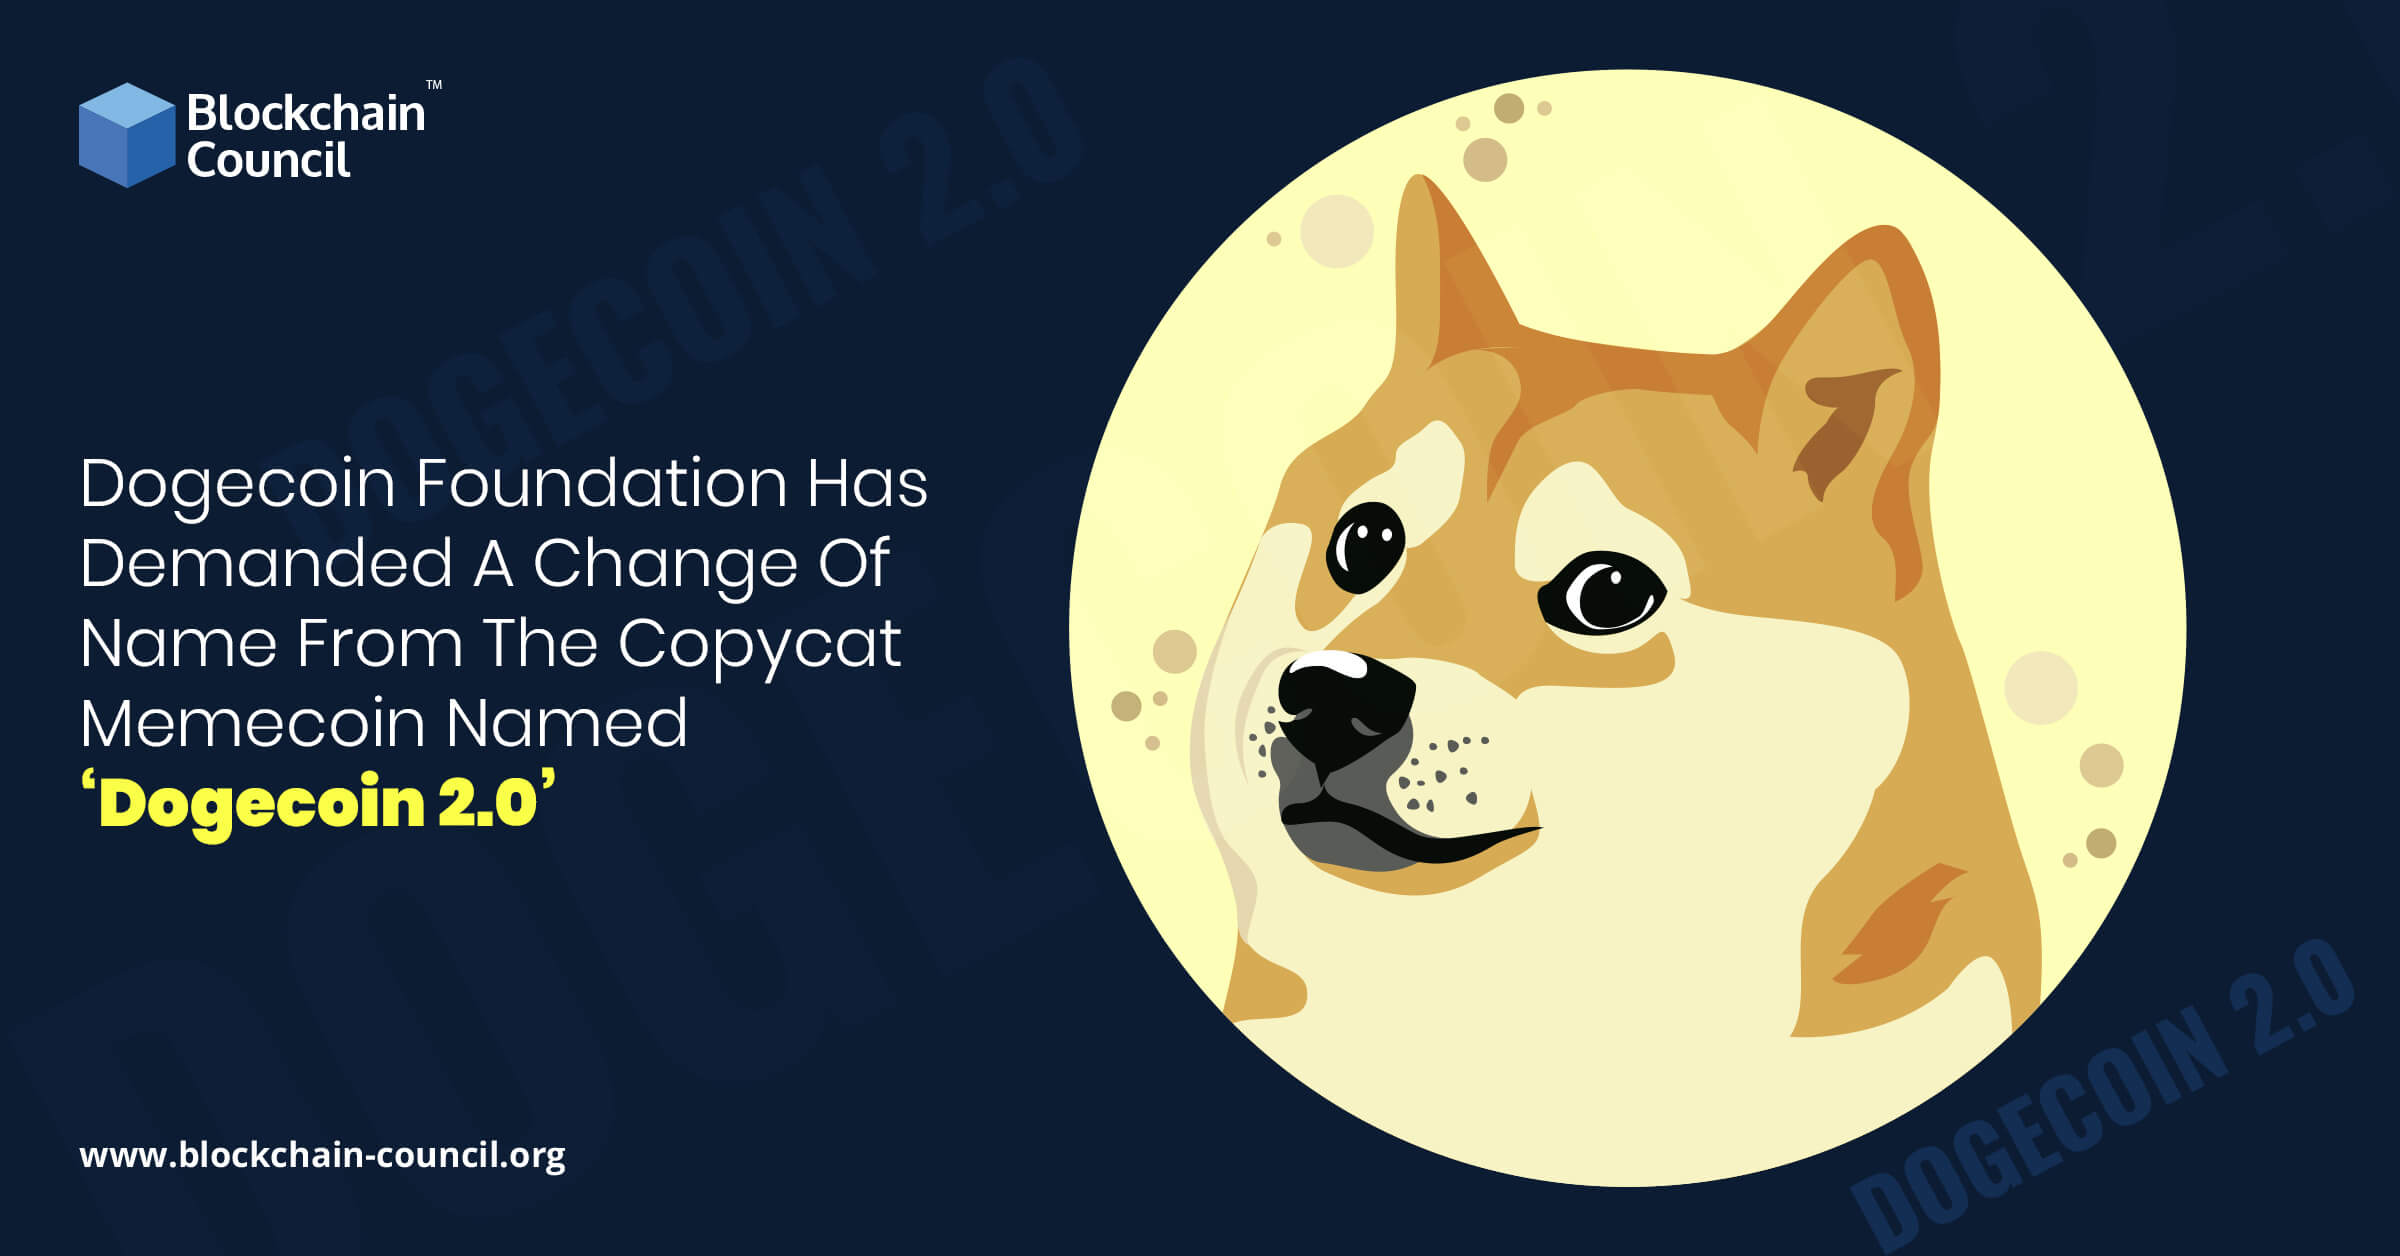 Dogecoin Foundation Has Demanded A Change Of Name From The Copycat Memecoin Named ‘Dogecoin 2.0’